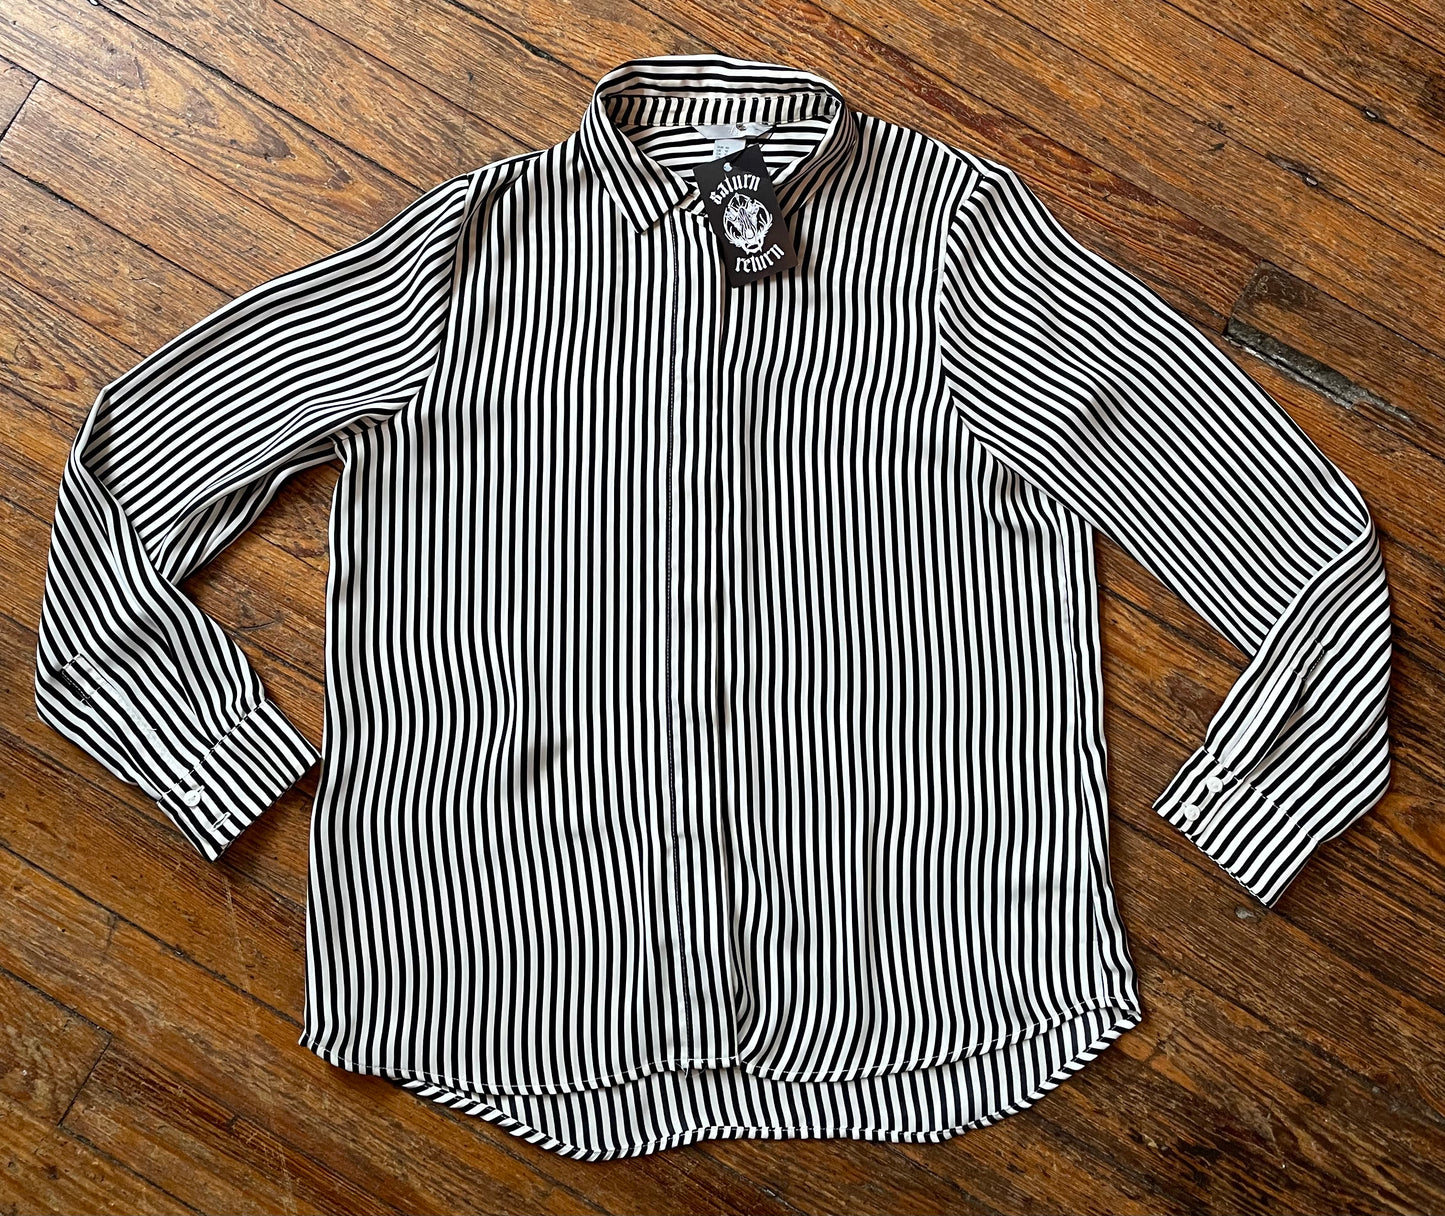 Pre-Loved Black and White Striped Long Sleeve Top